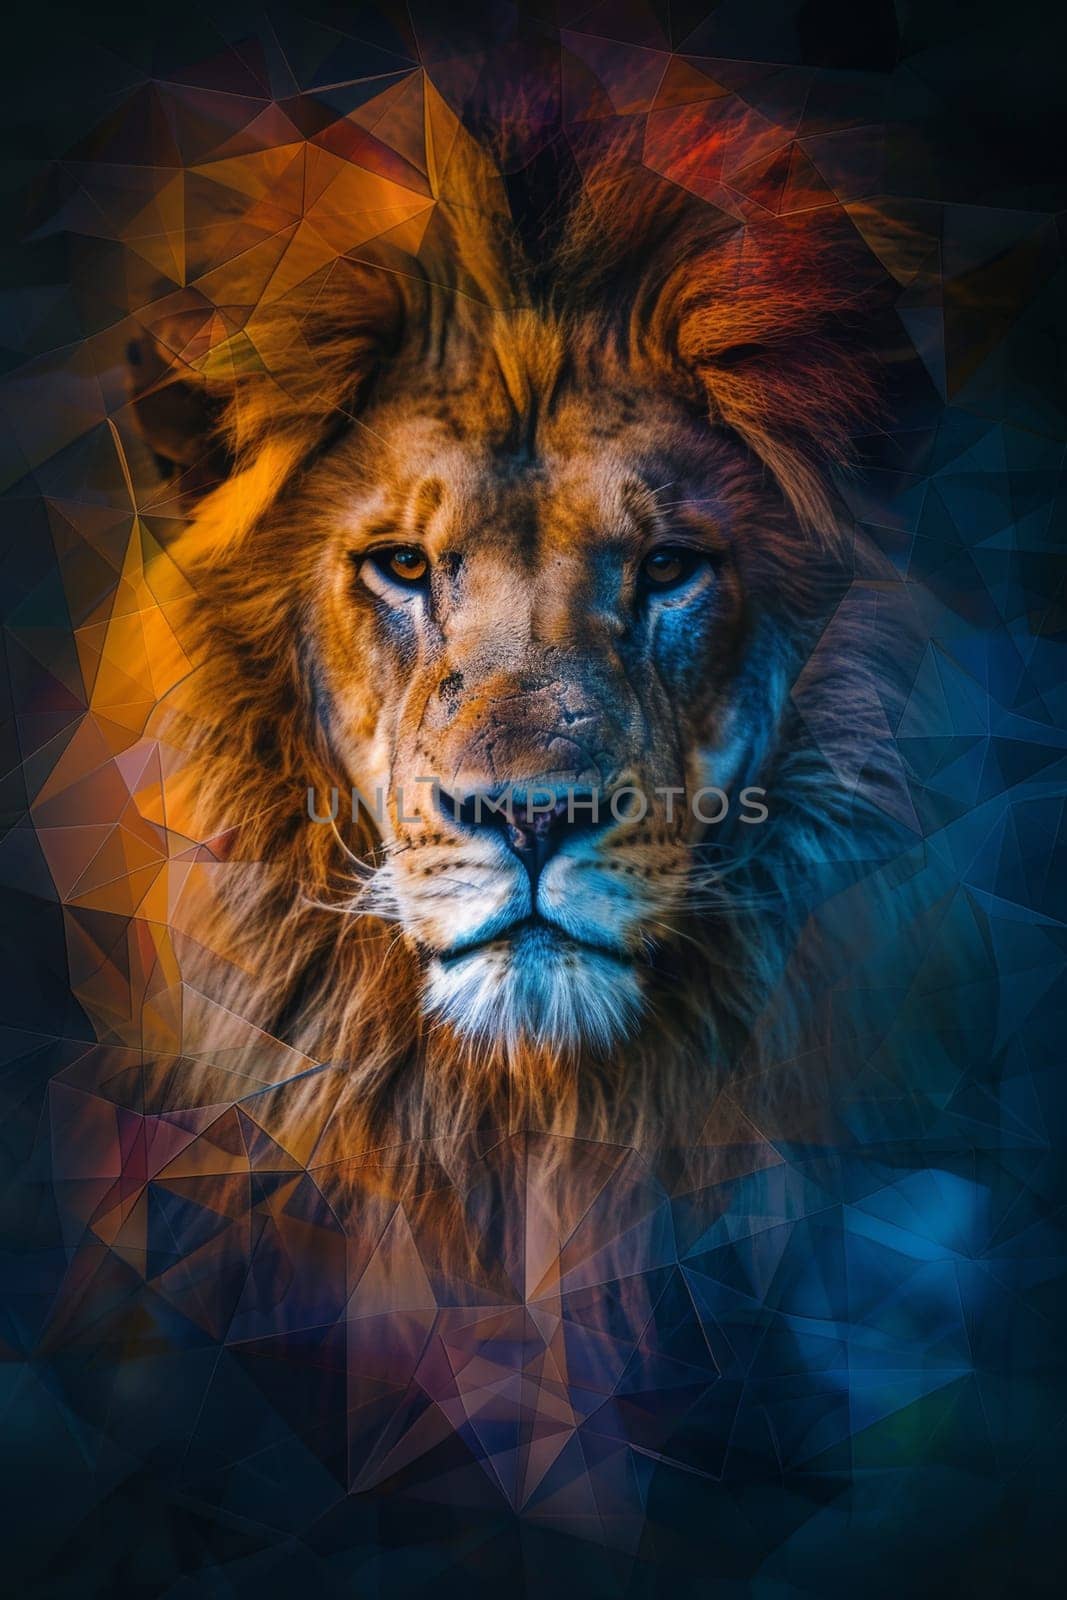 A lion is shown in a geometric pattern with blue and green colors